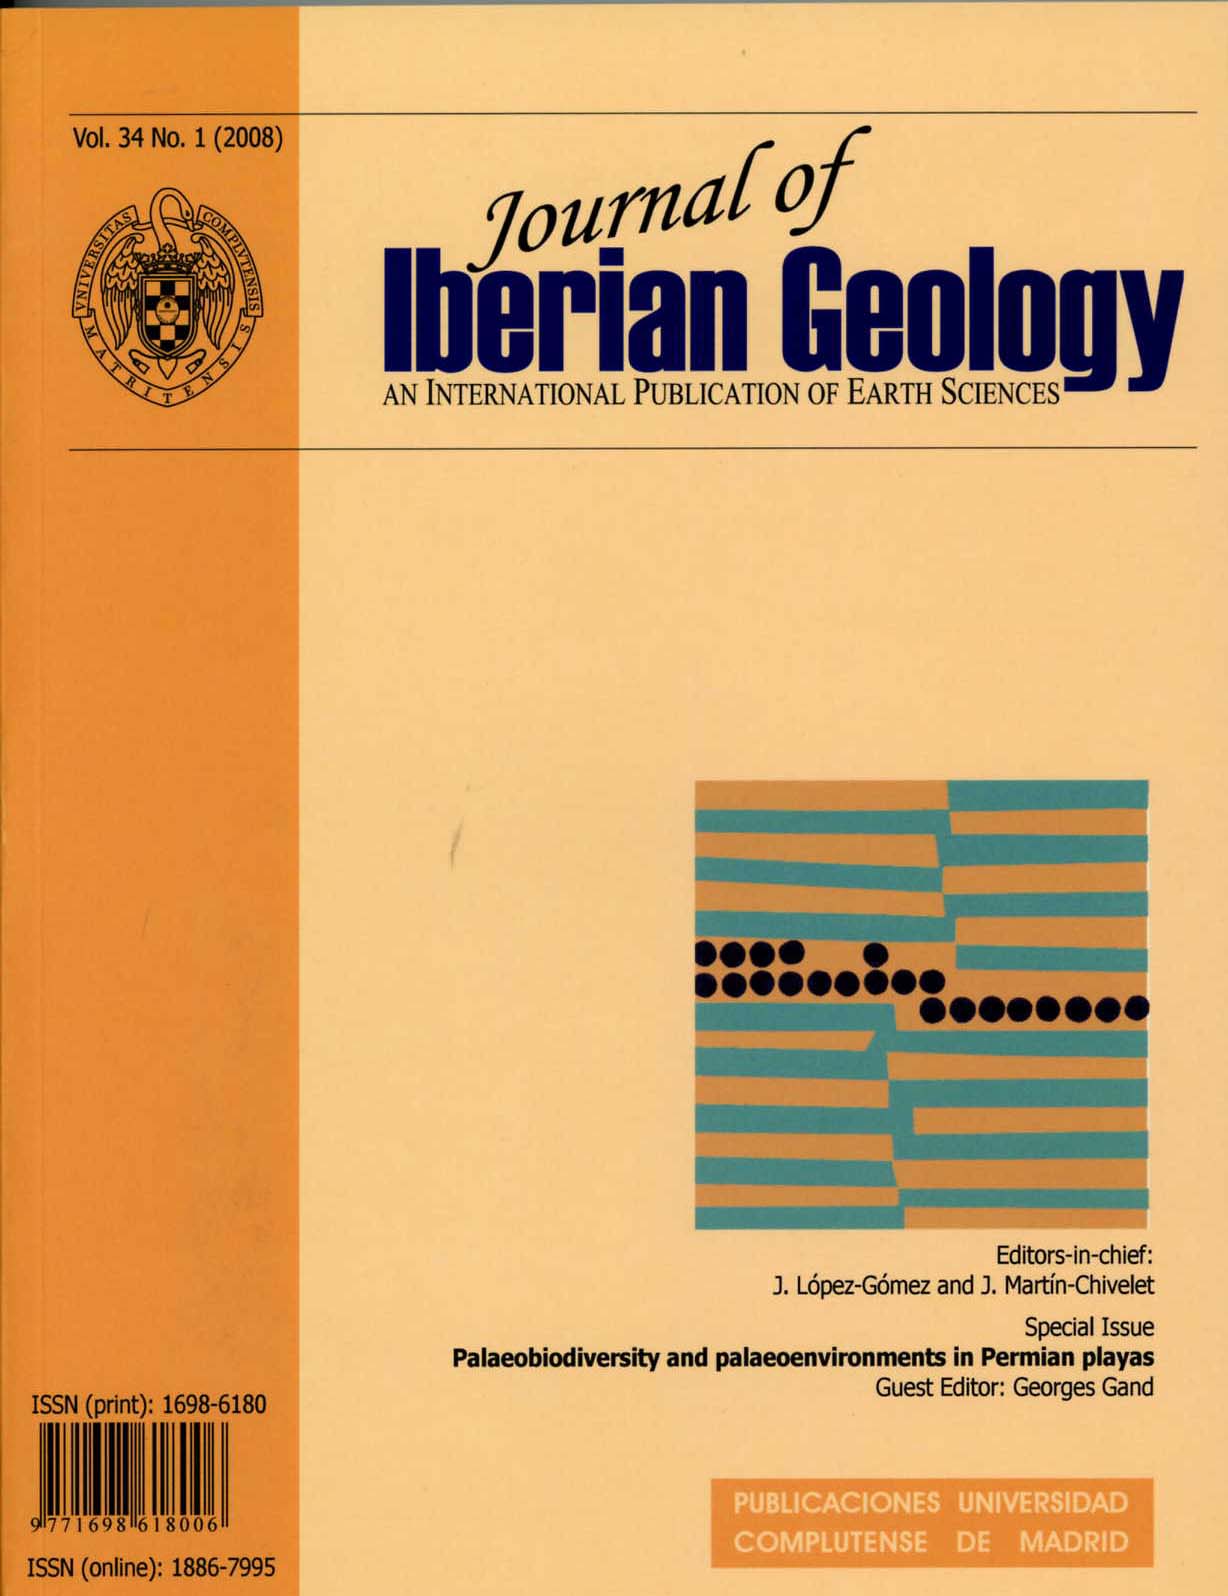 					View Vol. 34 No. 1 (2008): Palaeobiodiversity and palaeoenvironments in Permian playas
				